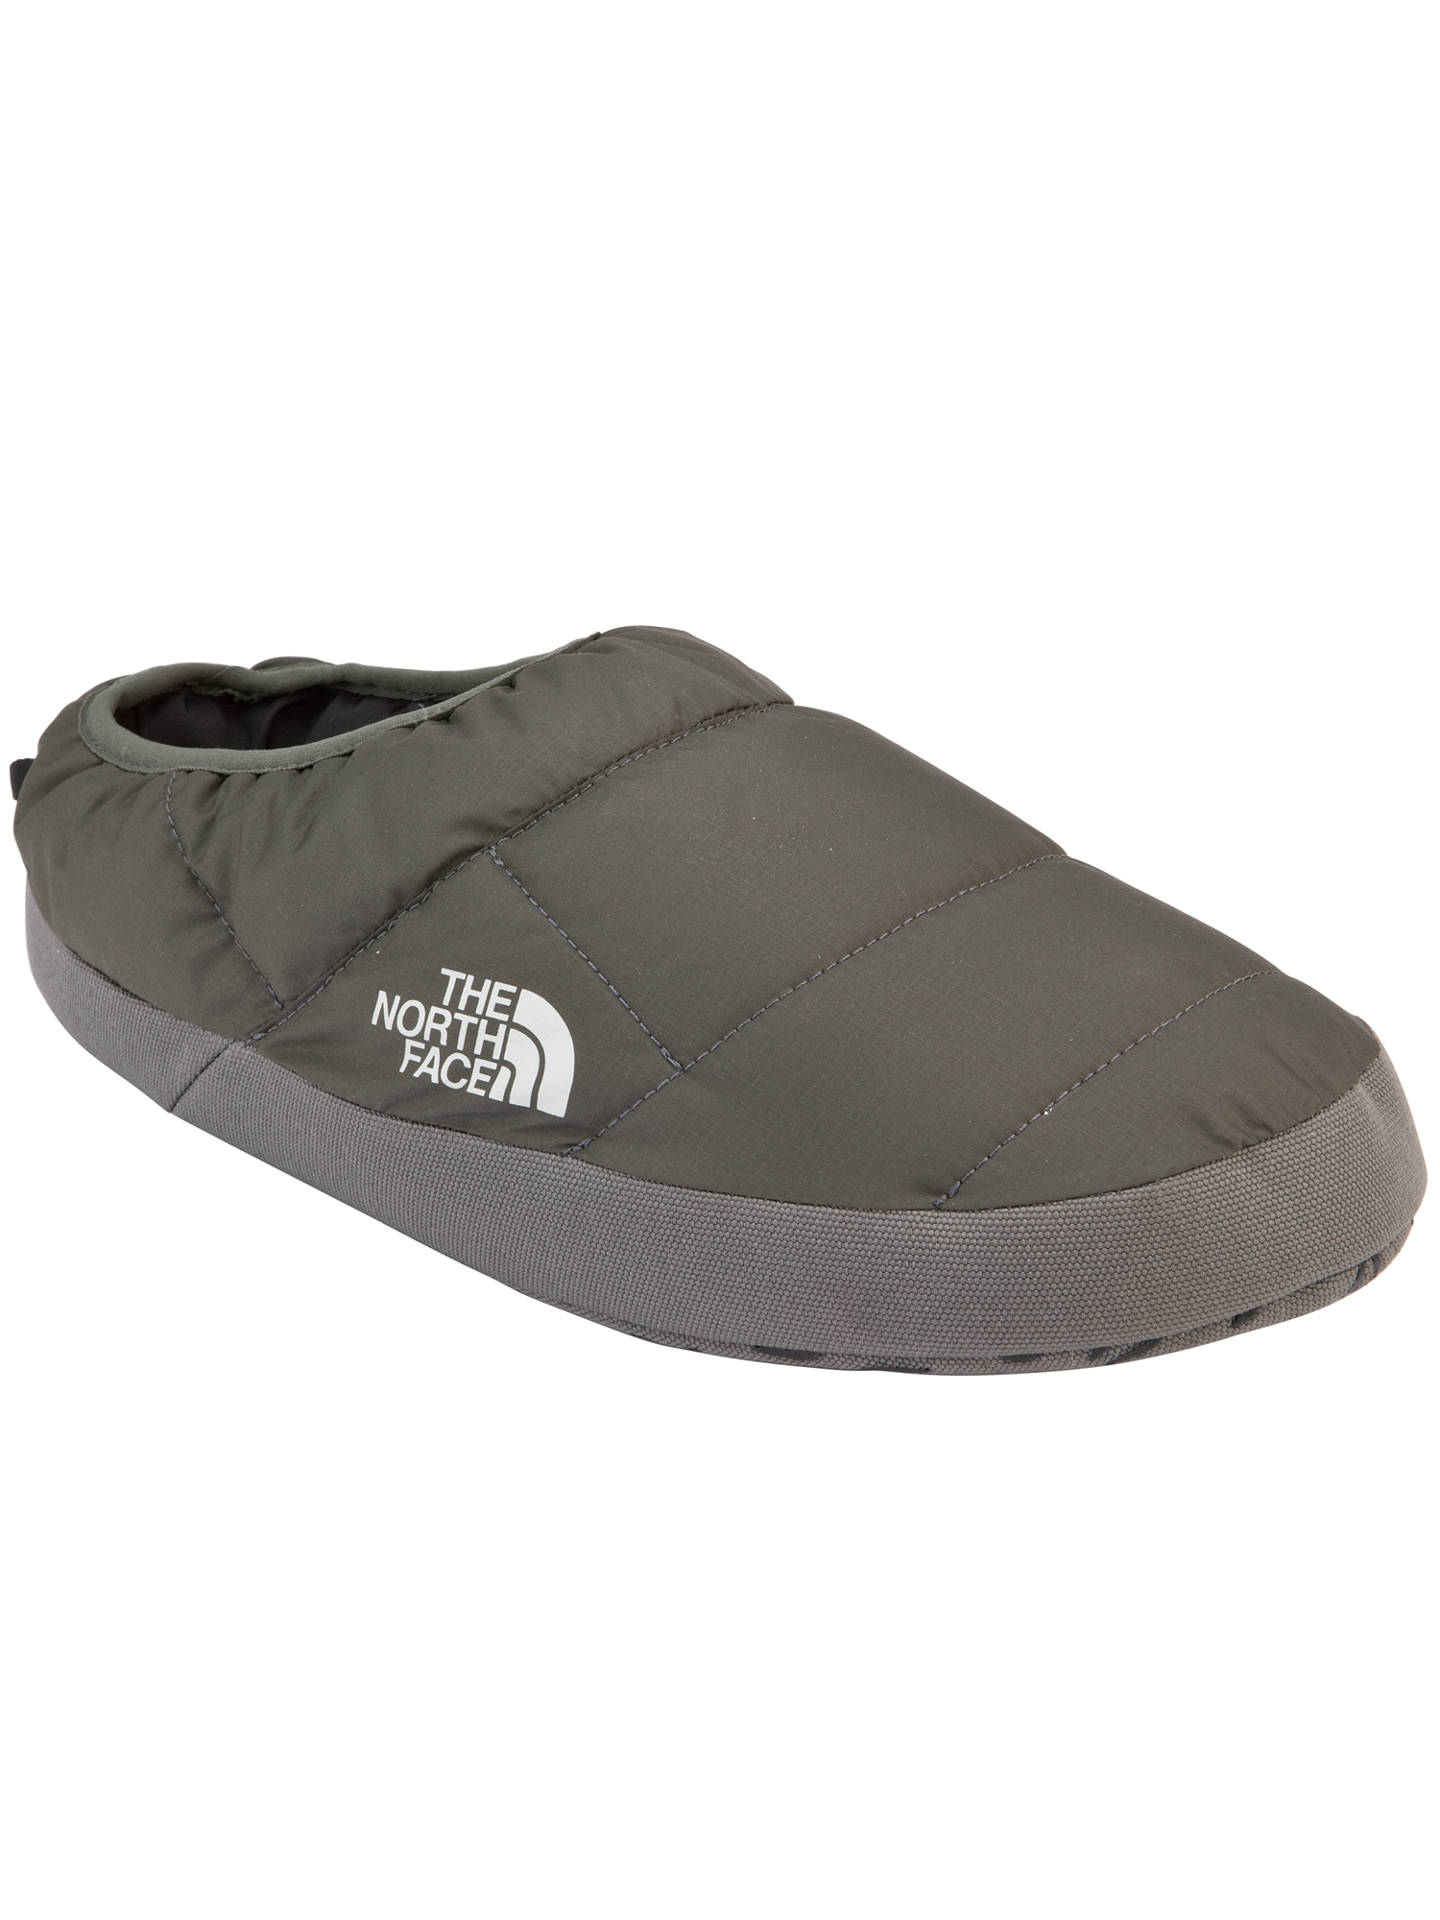 The North Face Nuptse Tent Slippers | Grey at John Lewis & Partners